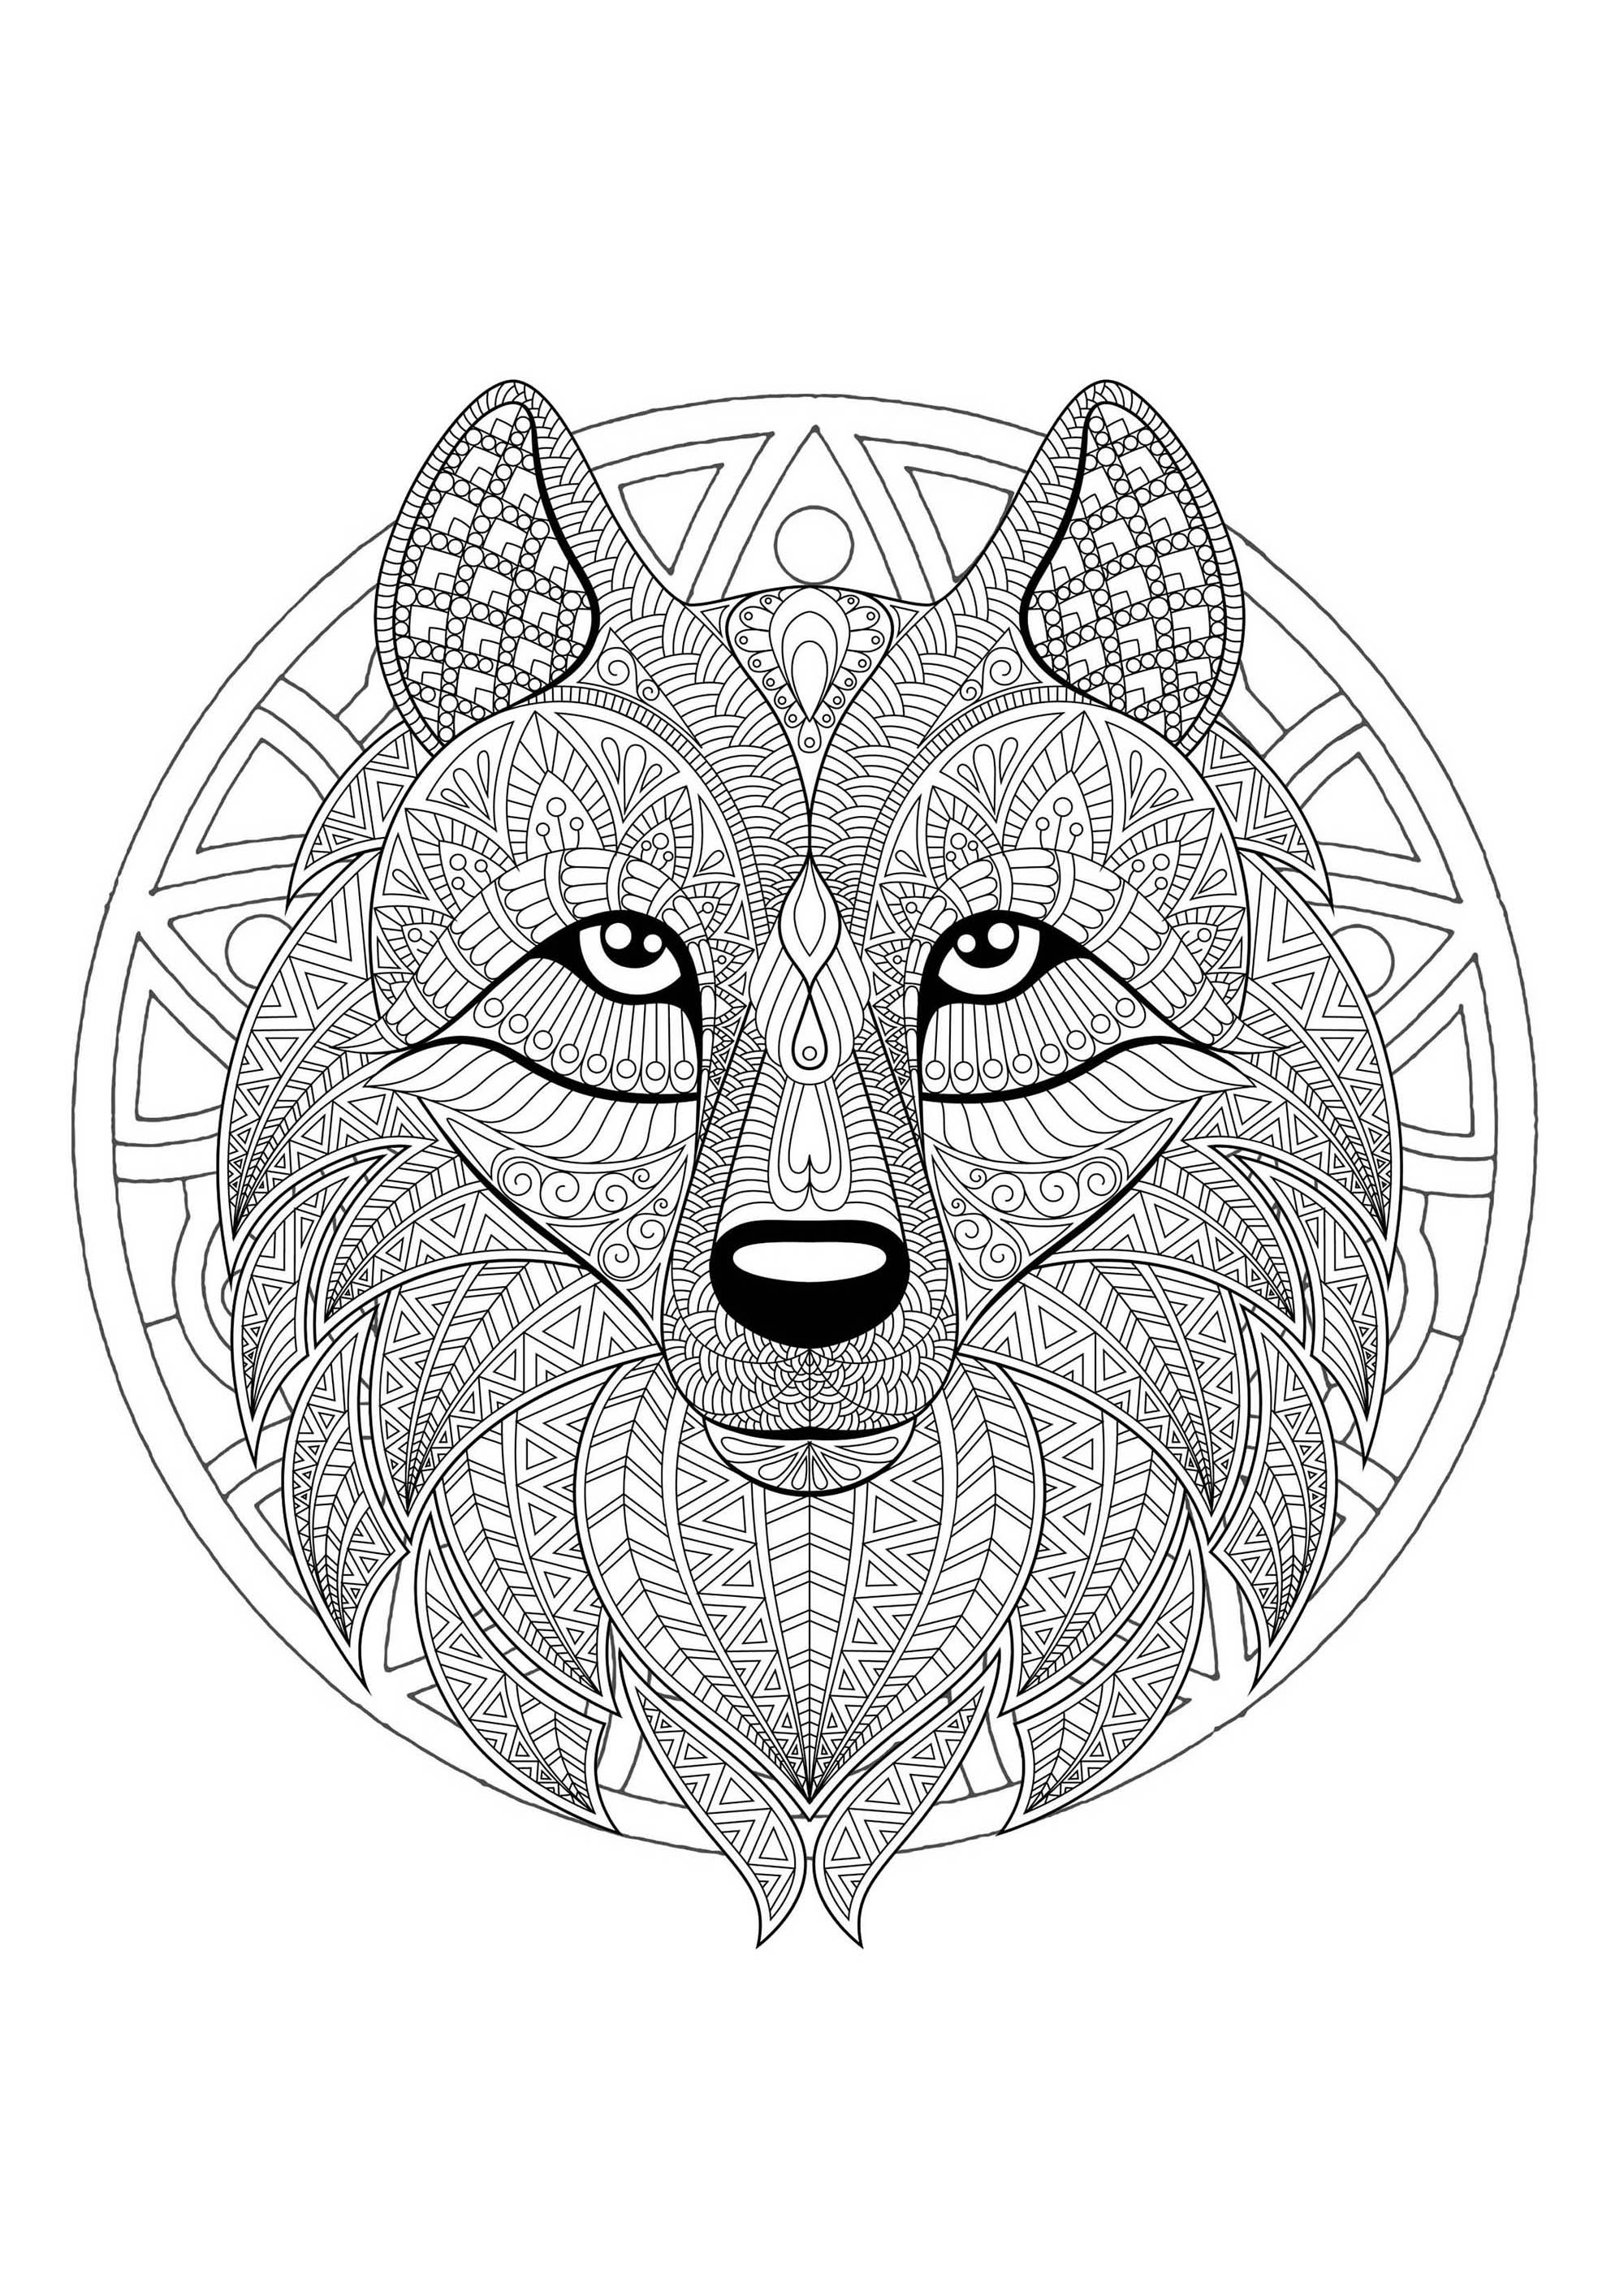 Prepare your best colors to give life to this beautiful wolf. Don't hesitate to share the result with us by sending it !